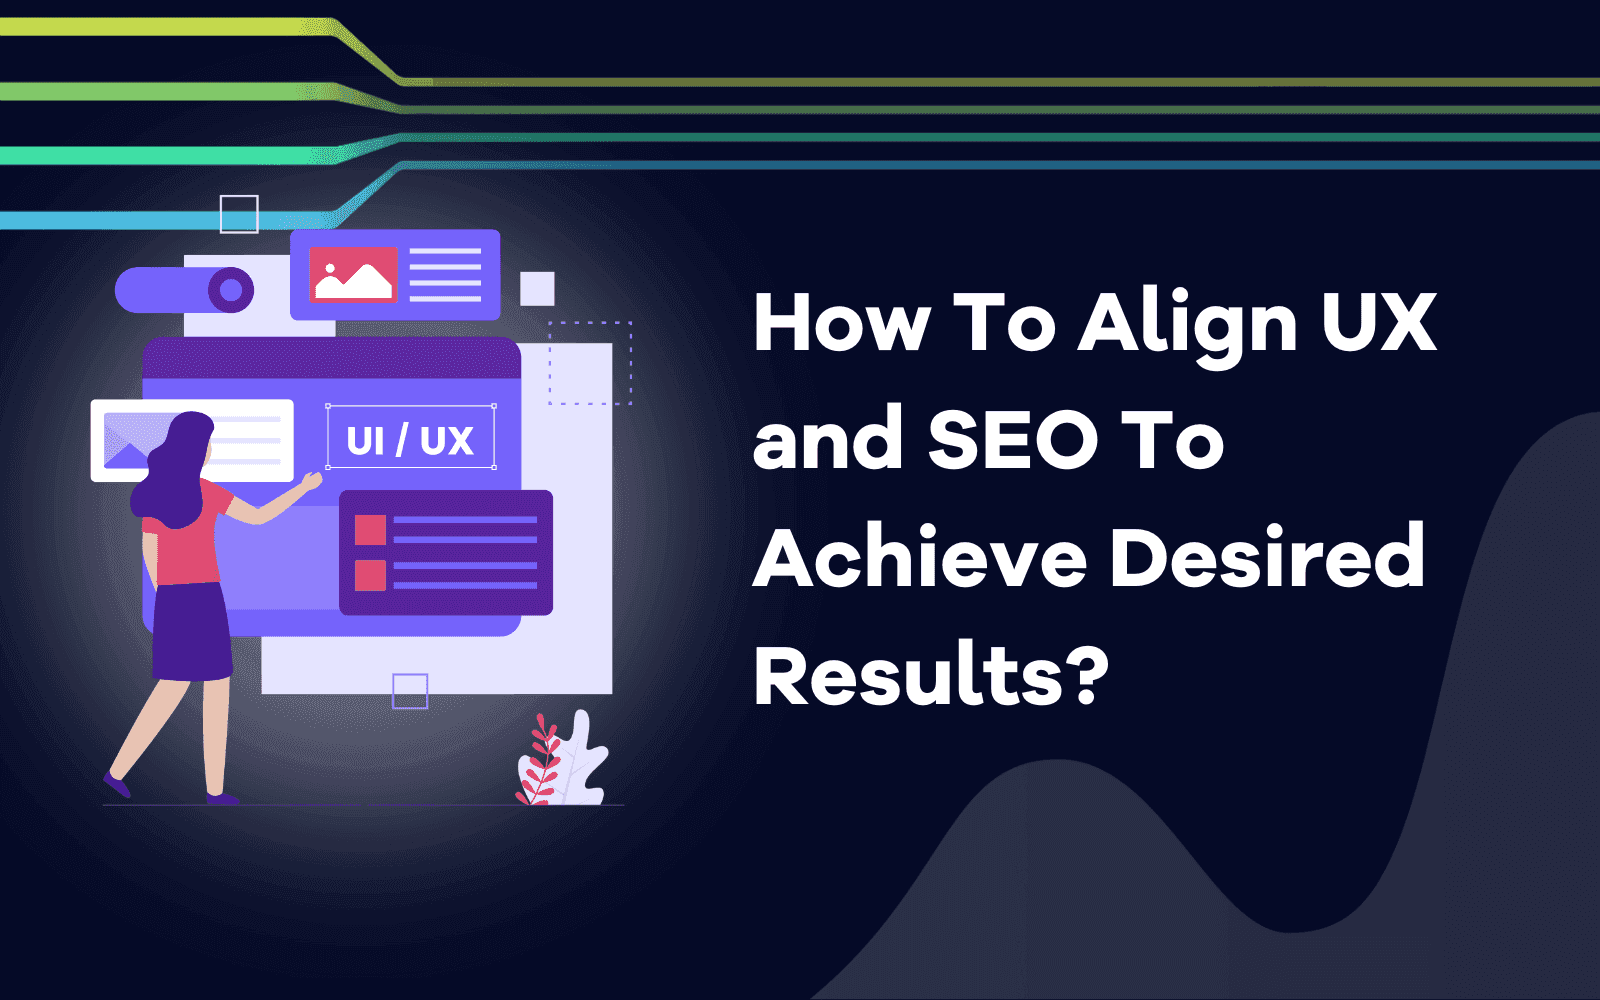 How To Align UX and SEO To Achieve Desired Results